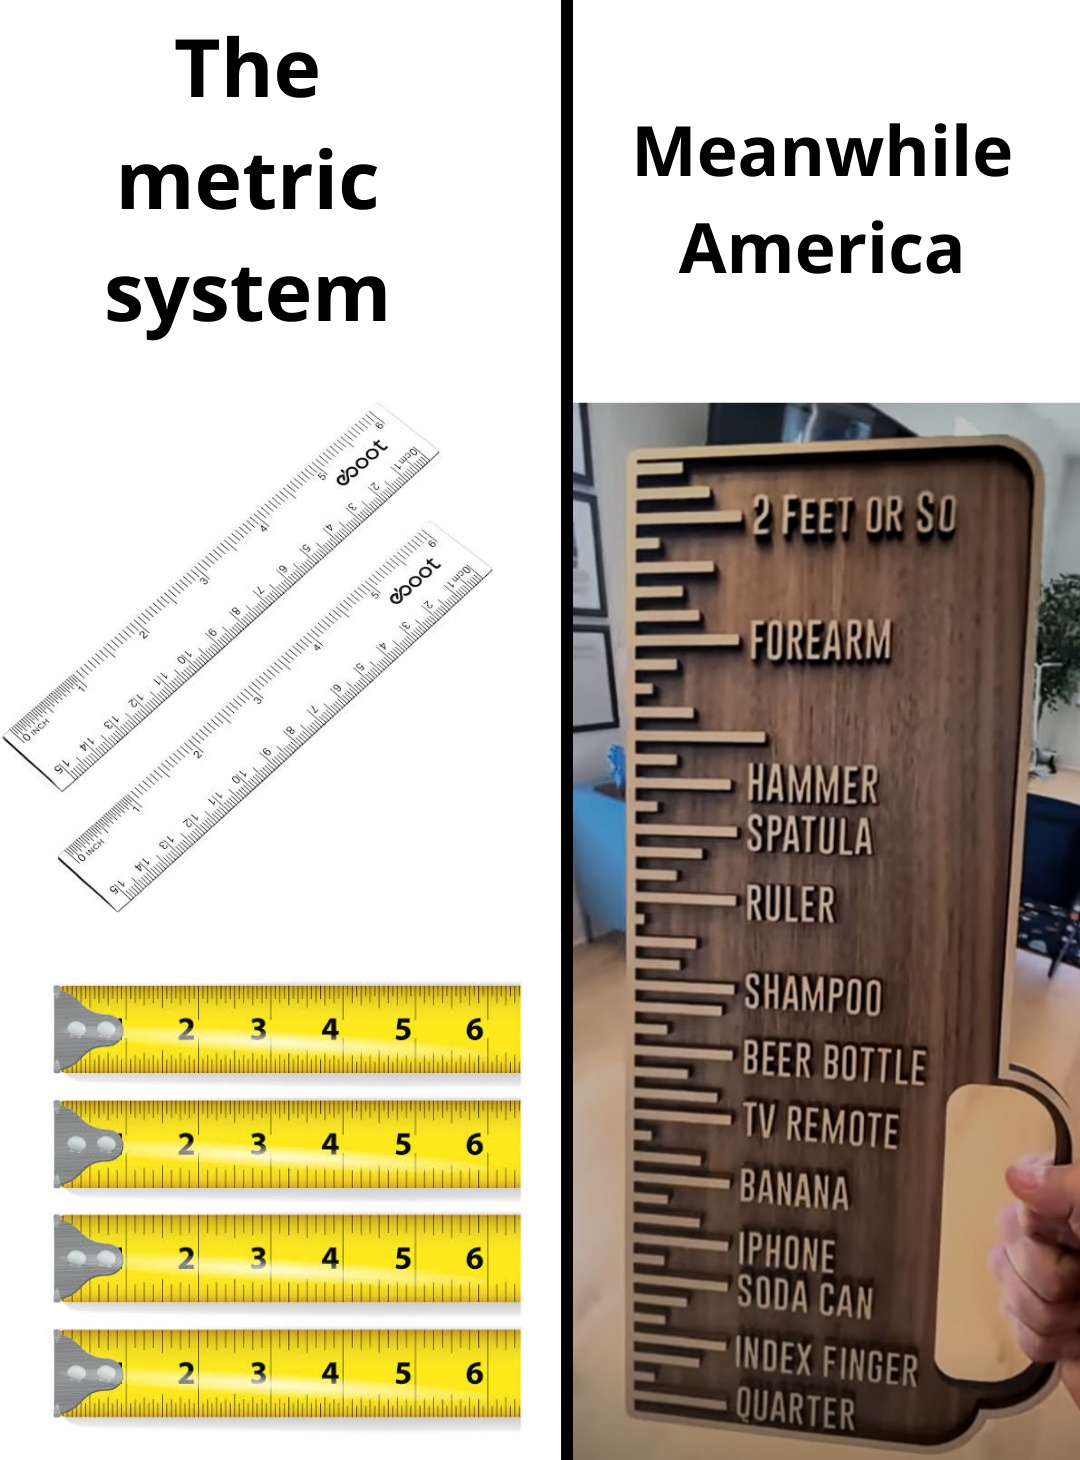 dank memes - material - The metric system Meanwhile America 2 Feet Or So boot Forearm Gooot Do Hammer Spatula Ruler 2 3 3 4 5 Shampoo Beer Bottle Tv Remote Banana Iphone Soda Can Index Finger Quarter 5 2 5